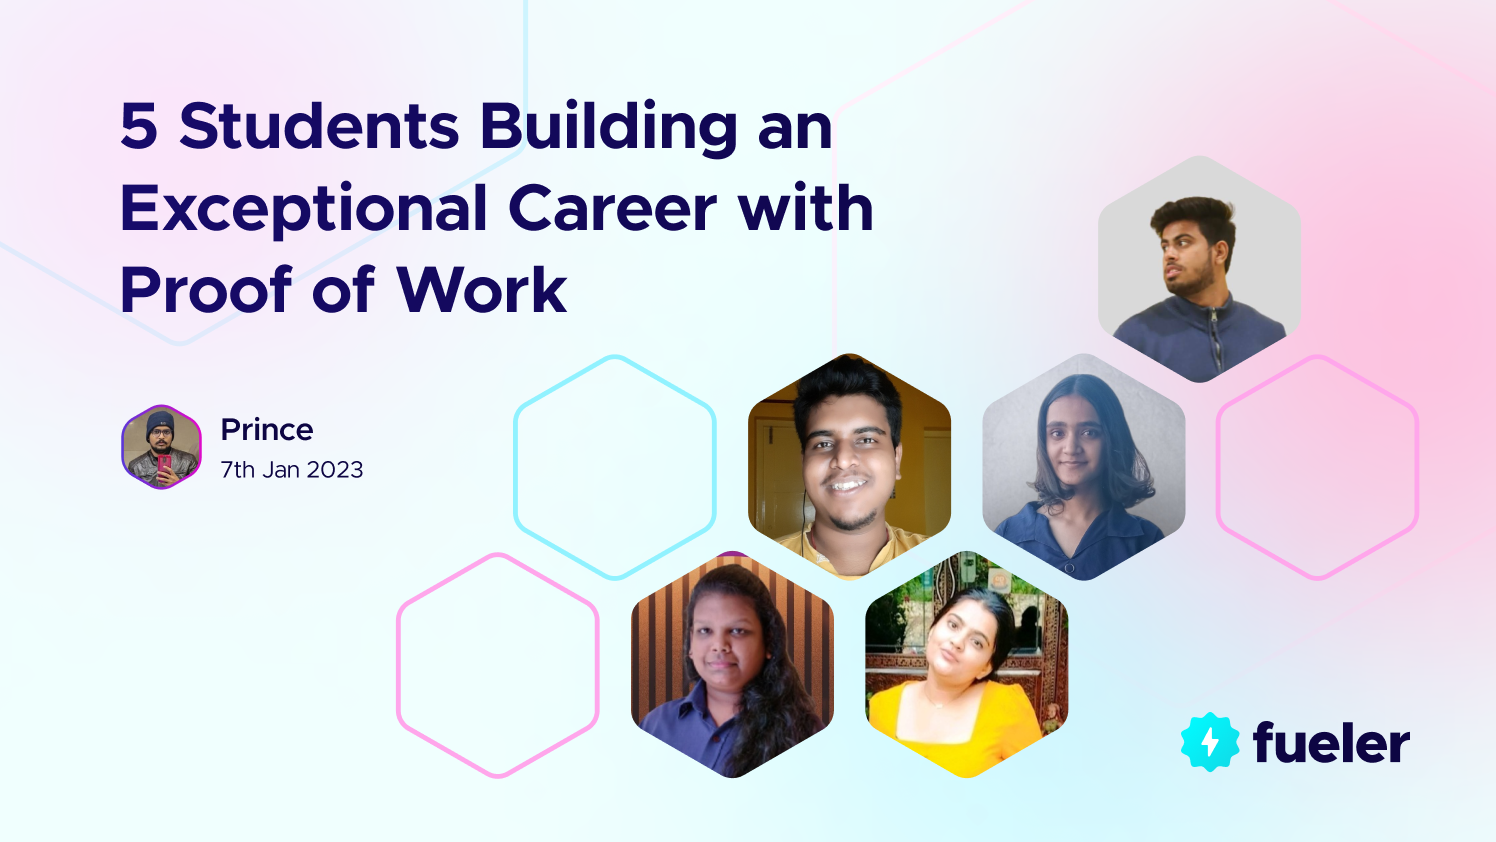 How Proof of Work has Helped 5 Students in Building An Exceptional Career?